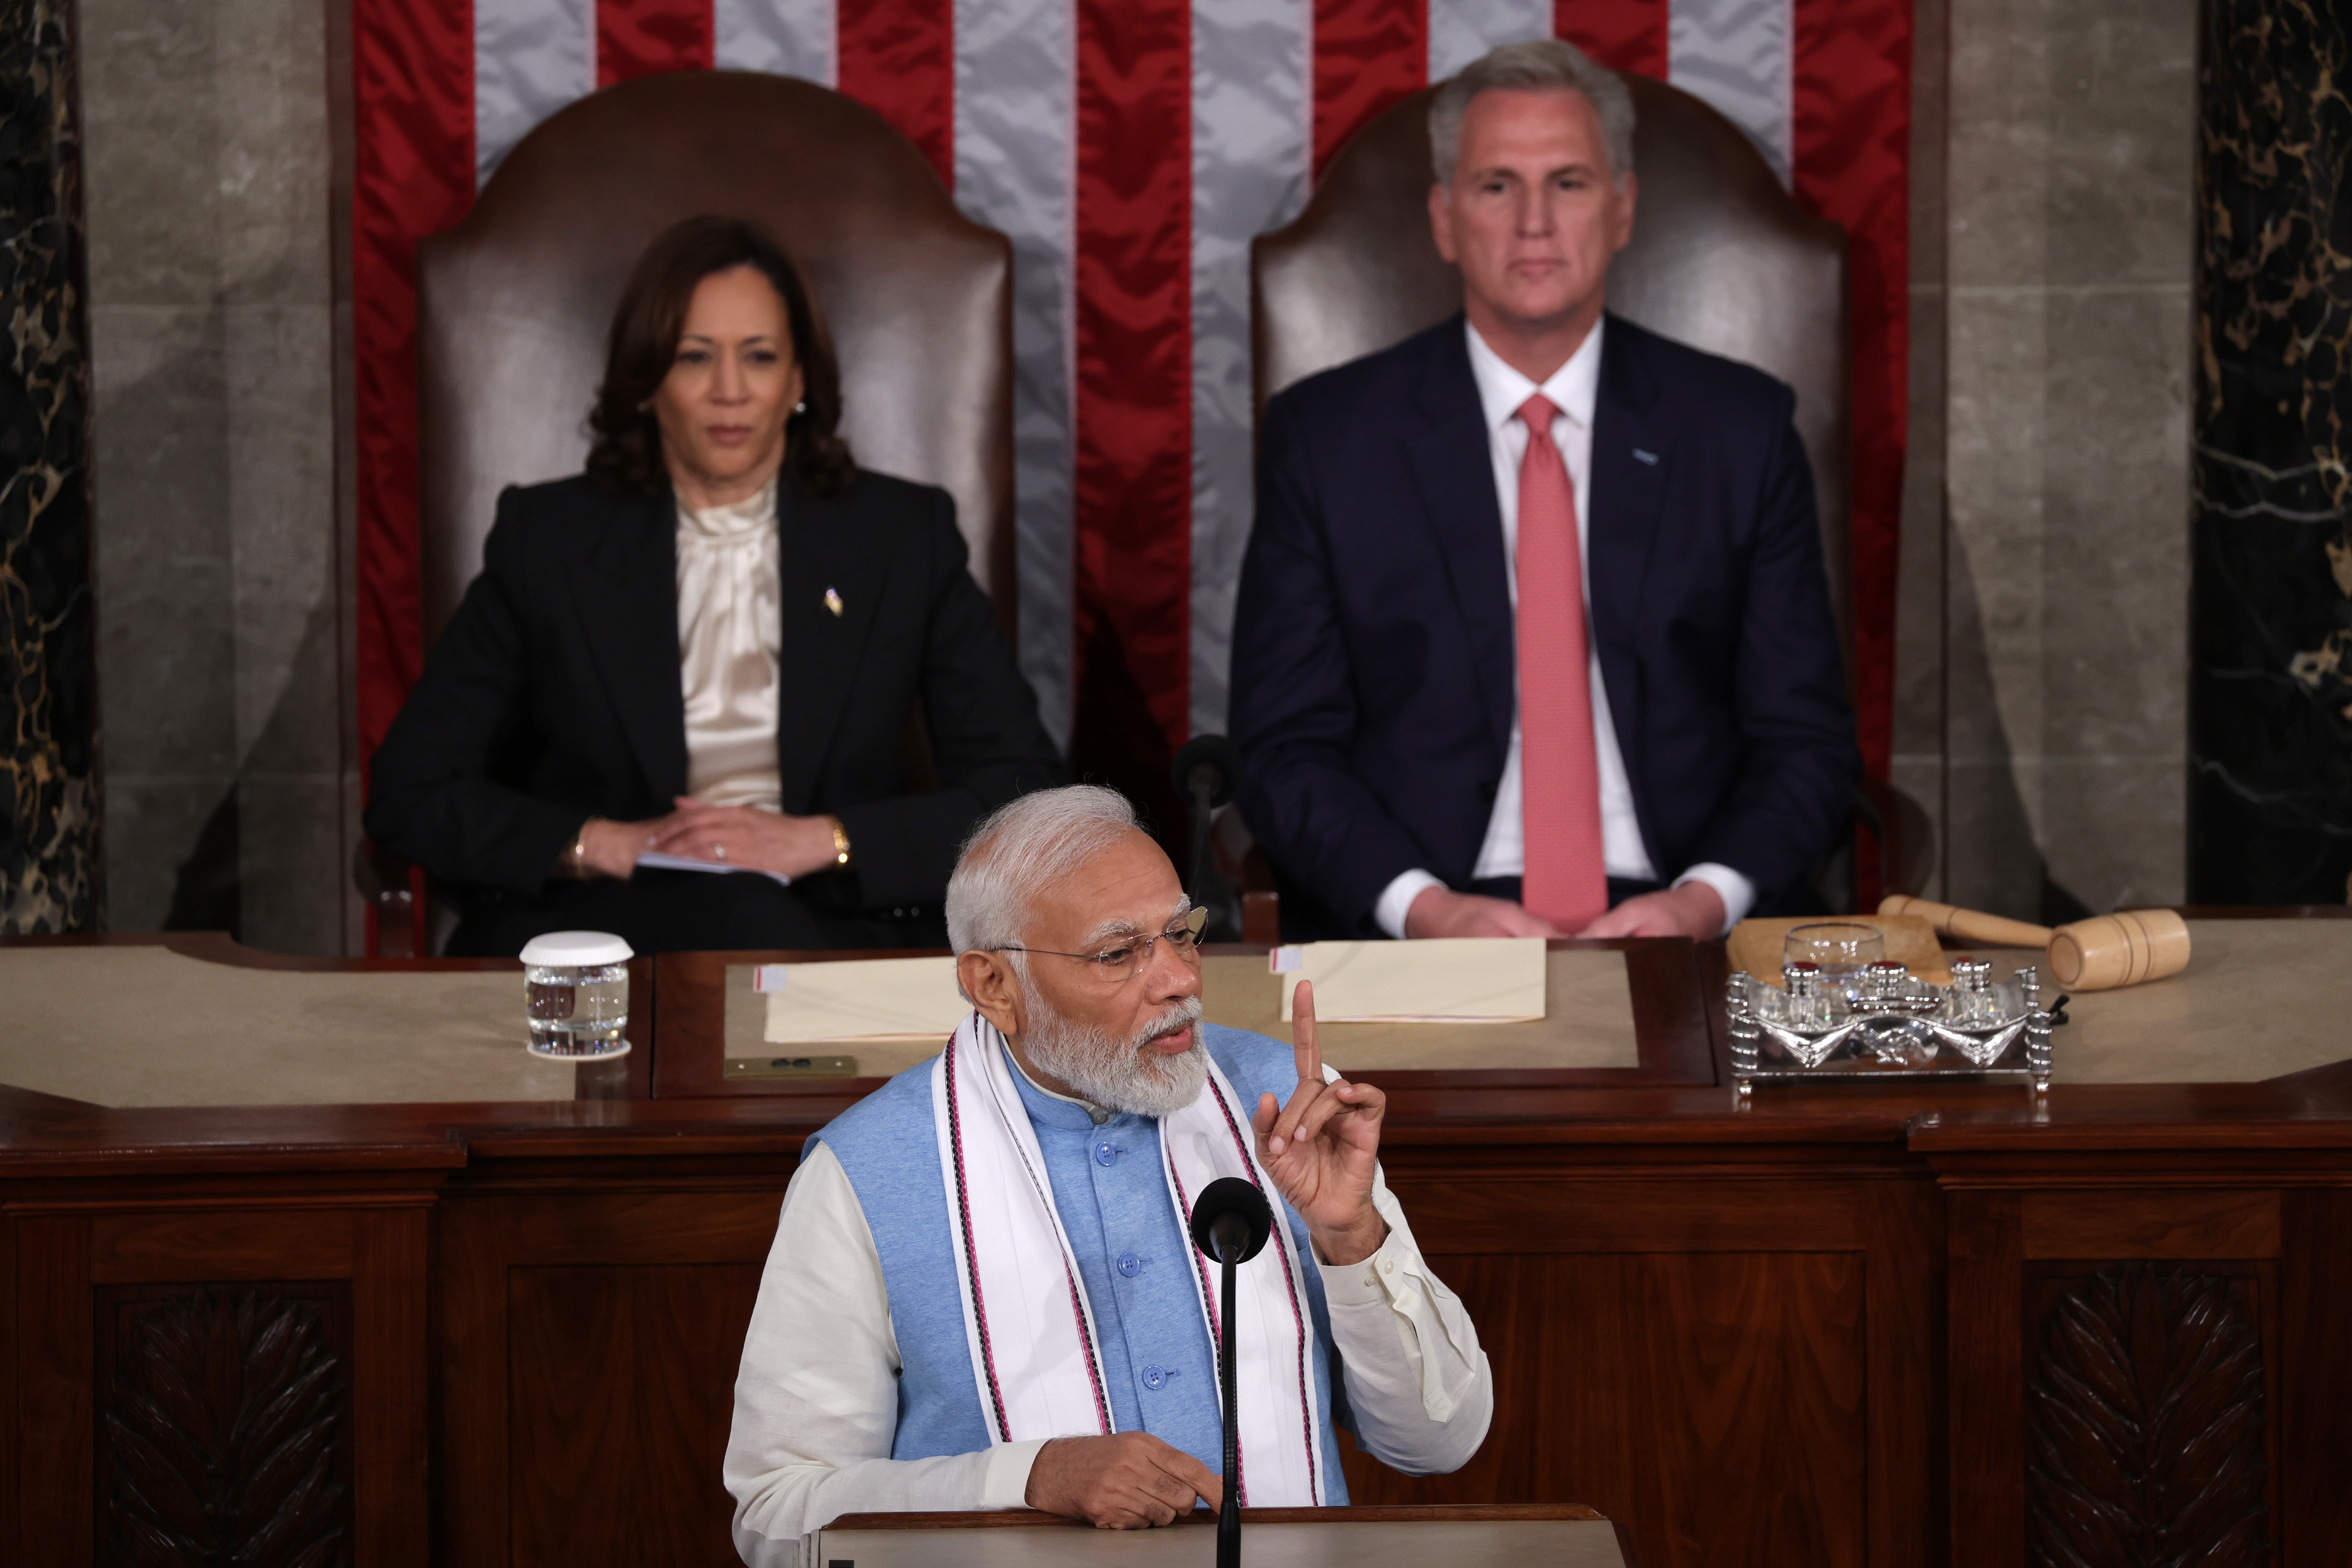 Indian prime minister Narendra Modi delivers remarks to a joint meeting of Congress at the US Capitol